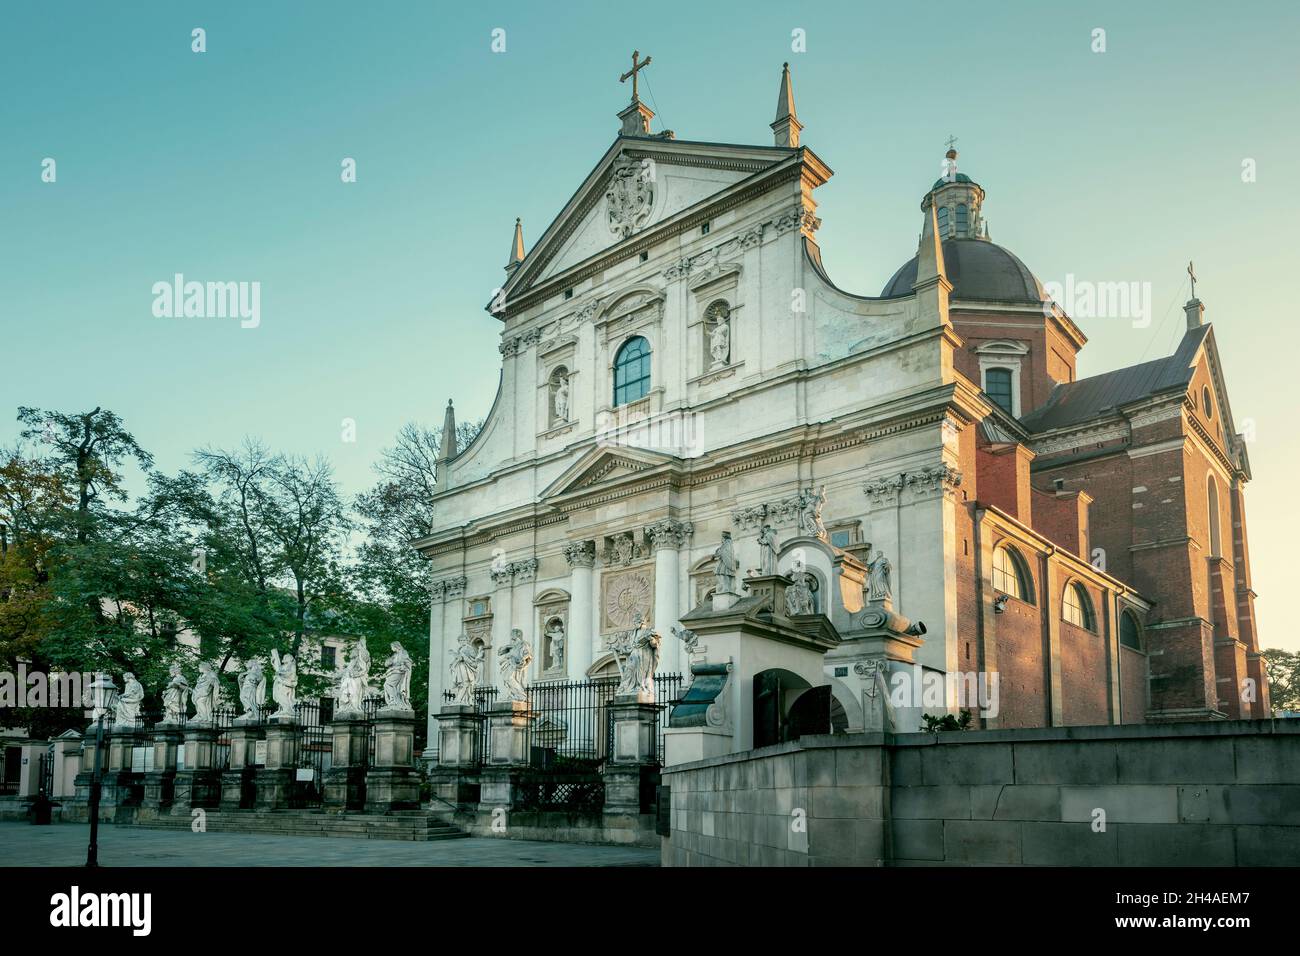 St. Peter and Paul church in Krakow, Poland Stock Photo